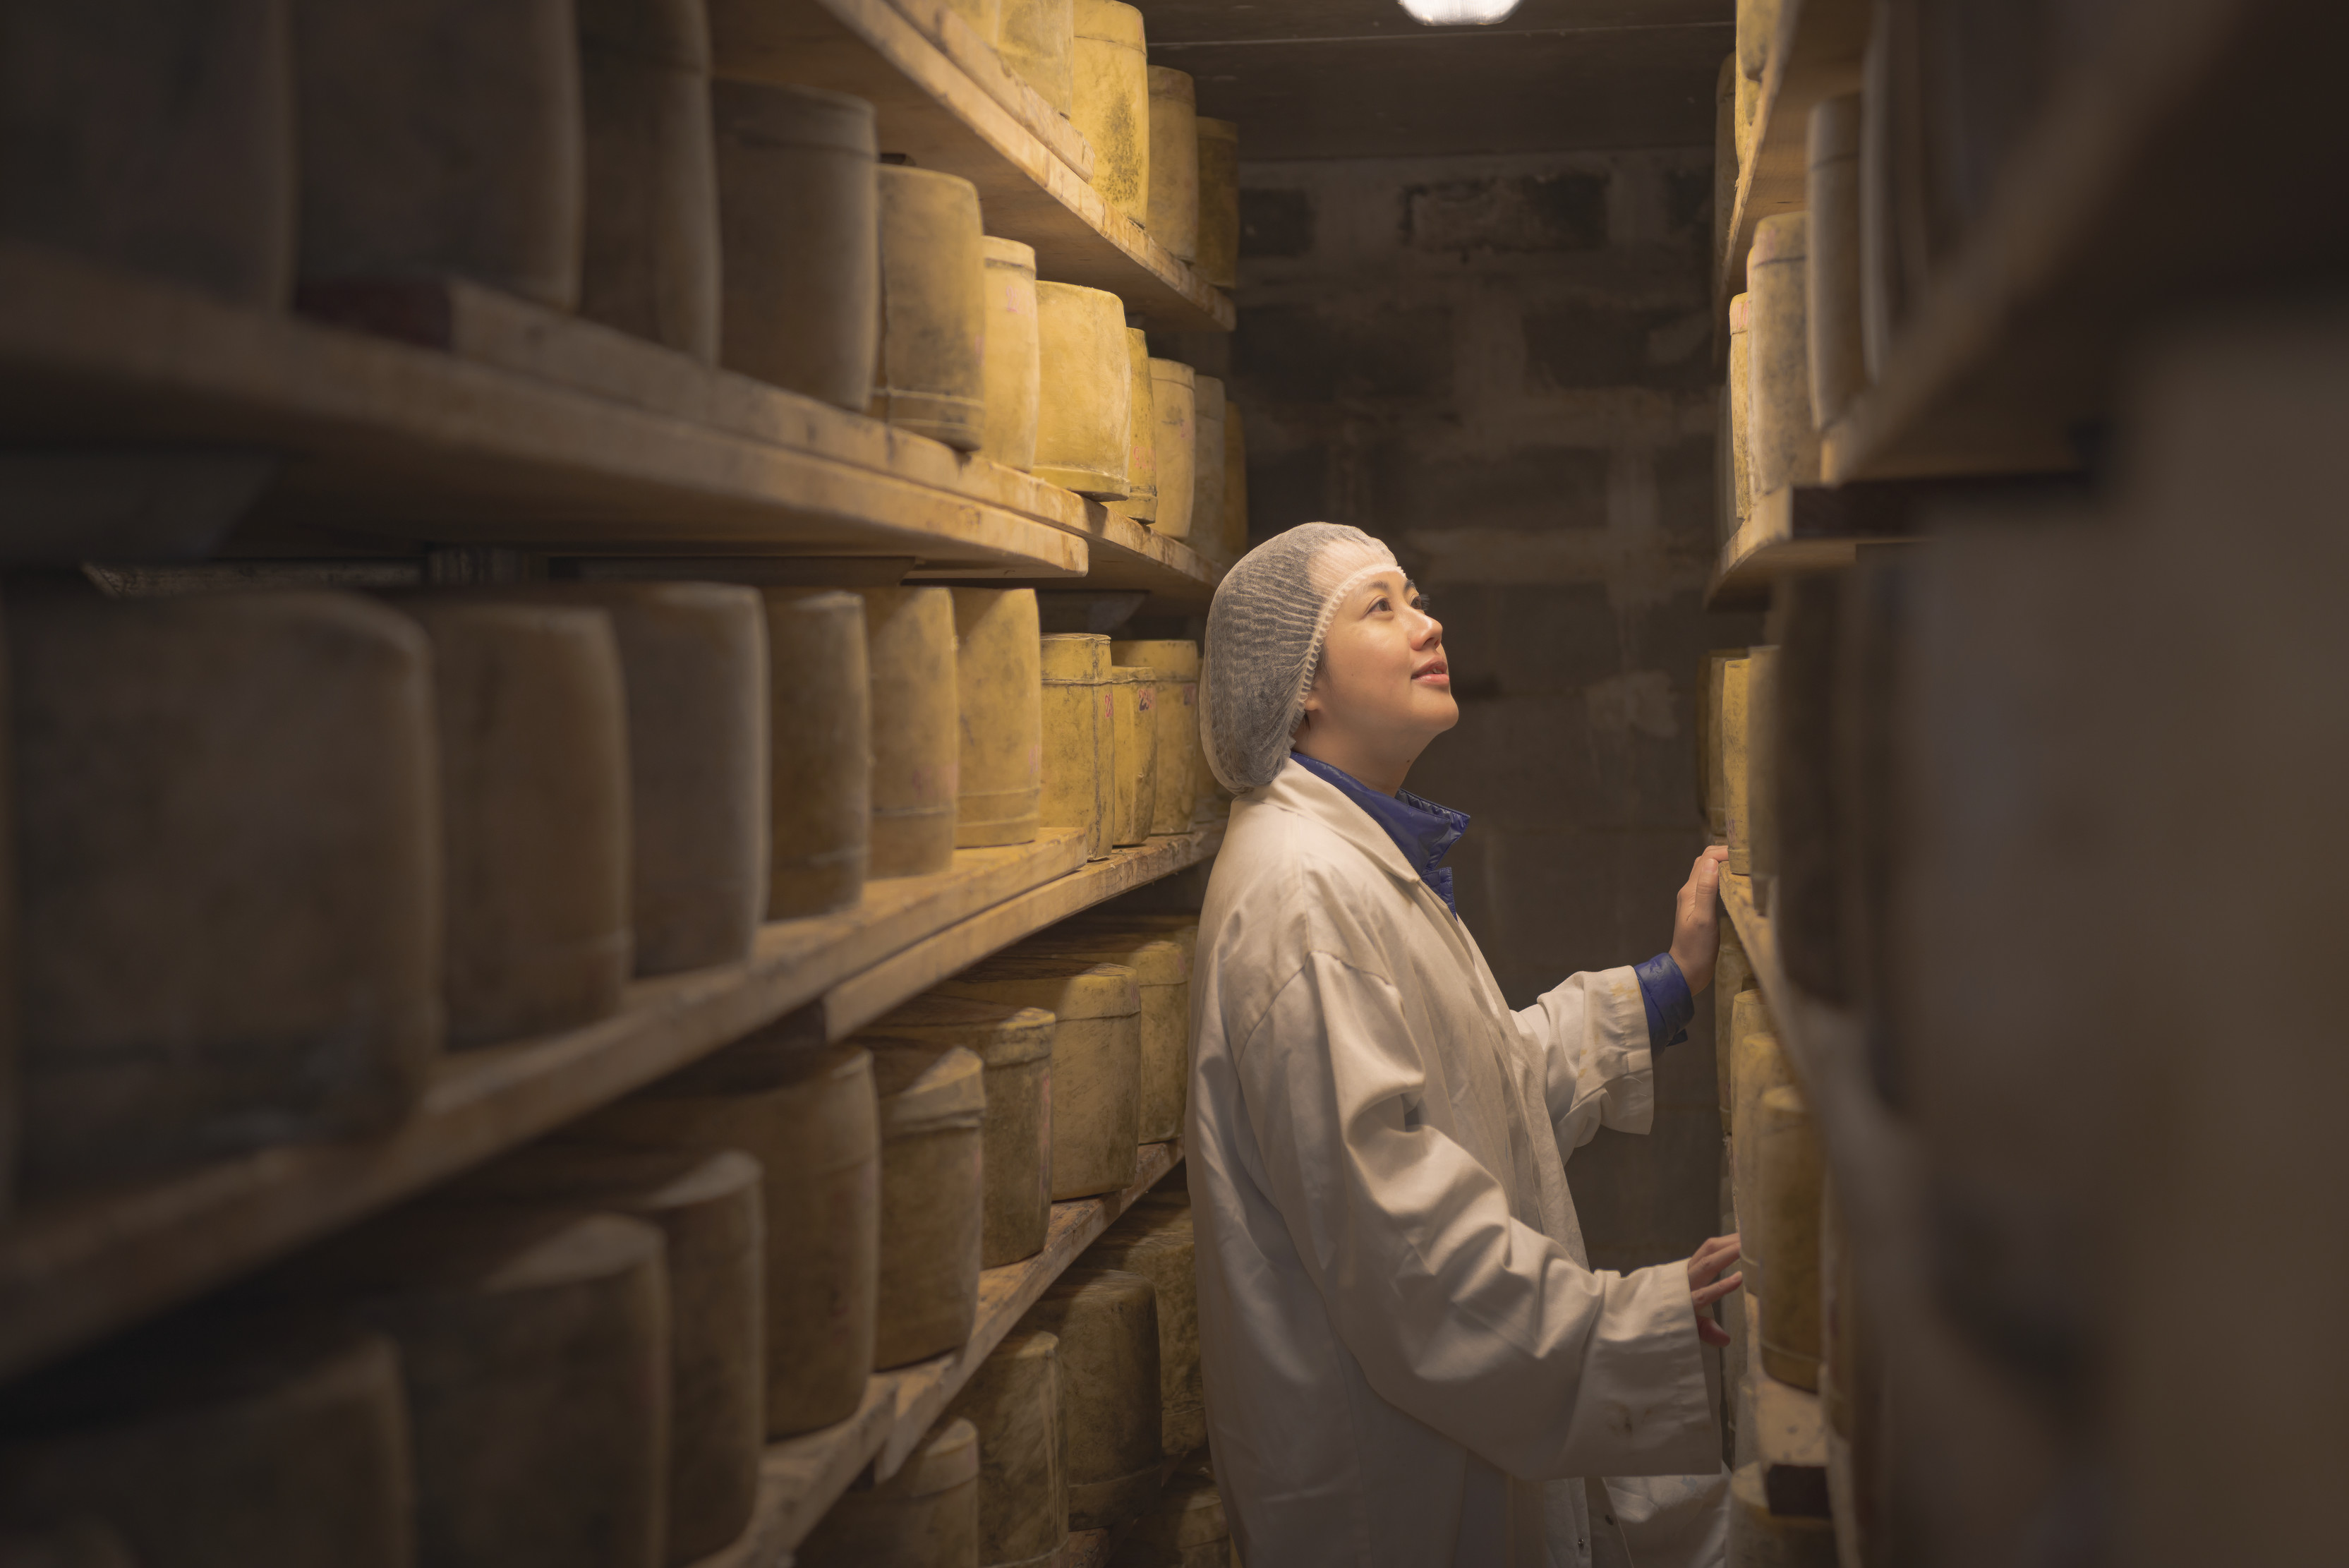 A staff member wearing a hair net walks stands in the aisle surrounded by blocks of cheese at Pyengana Dairy Company.